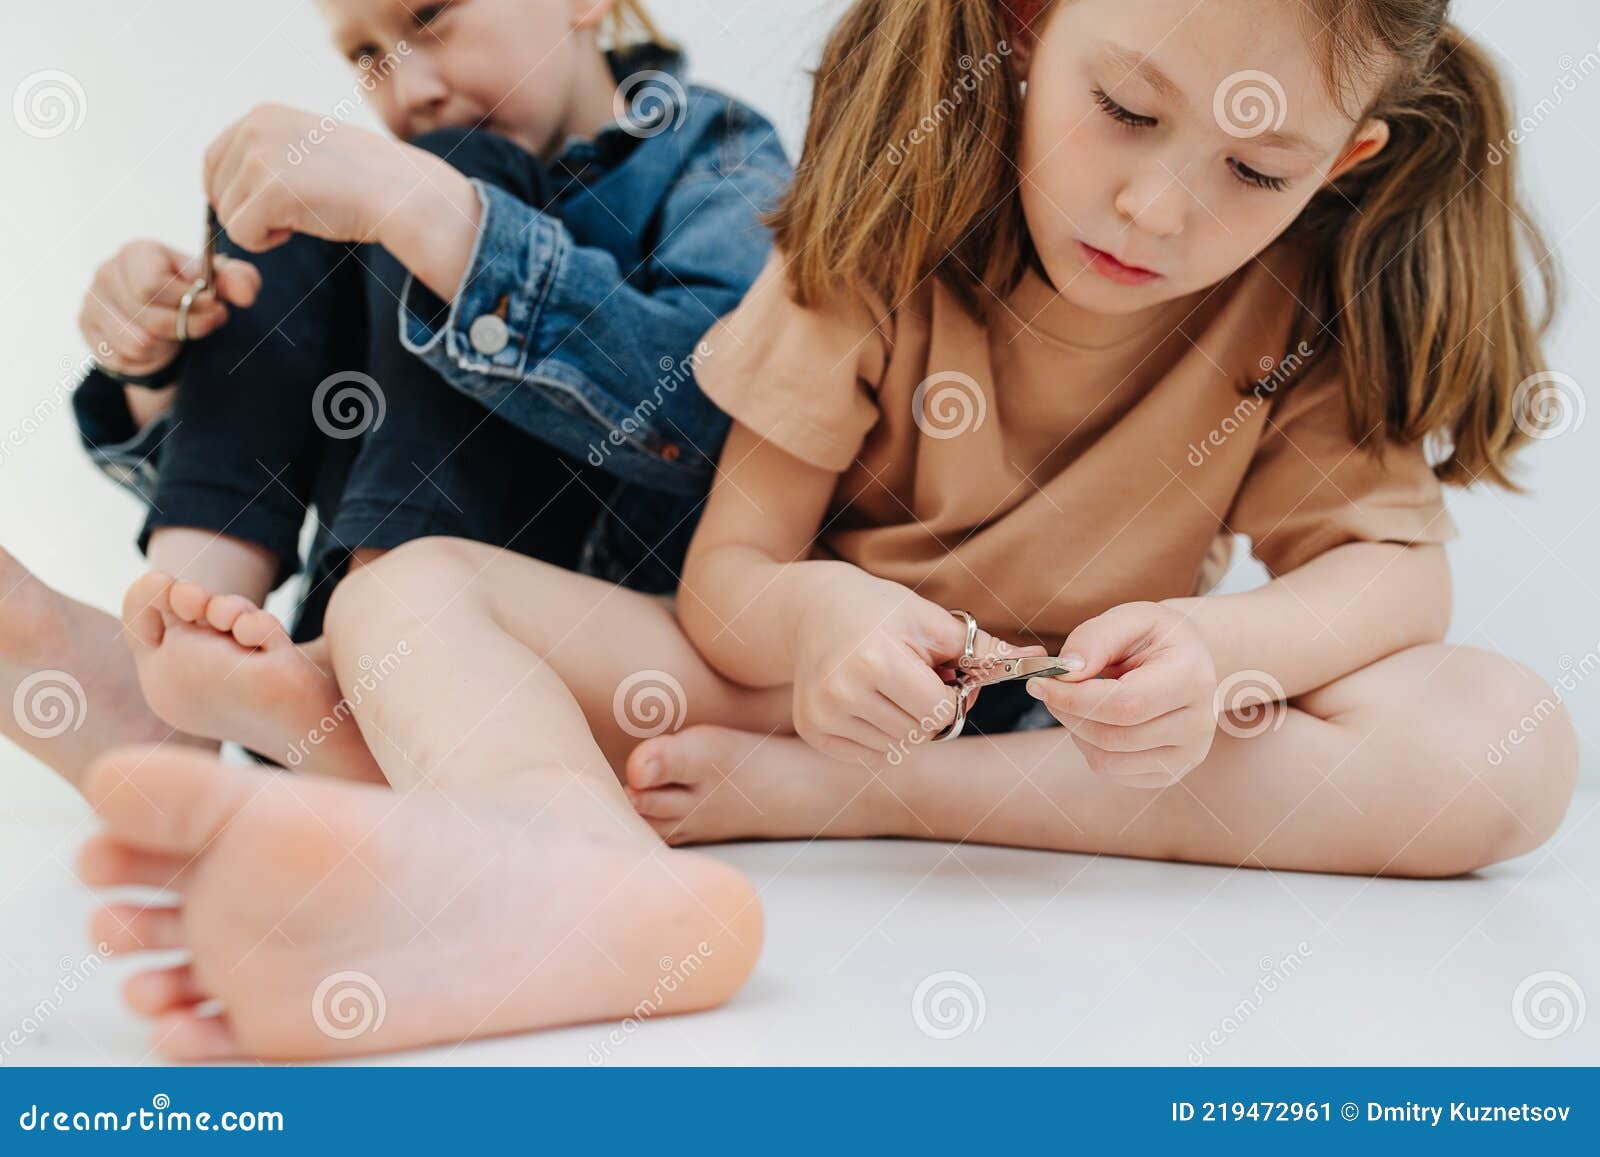 Funny Kids. Little Siblings with Bare Feet Clipping Their ...